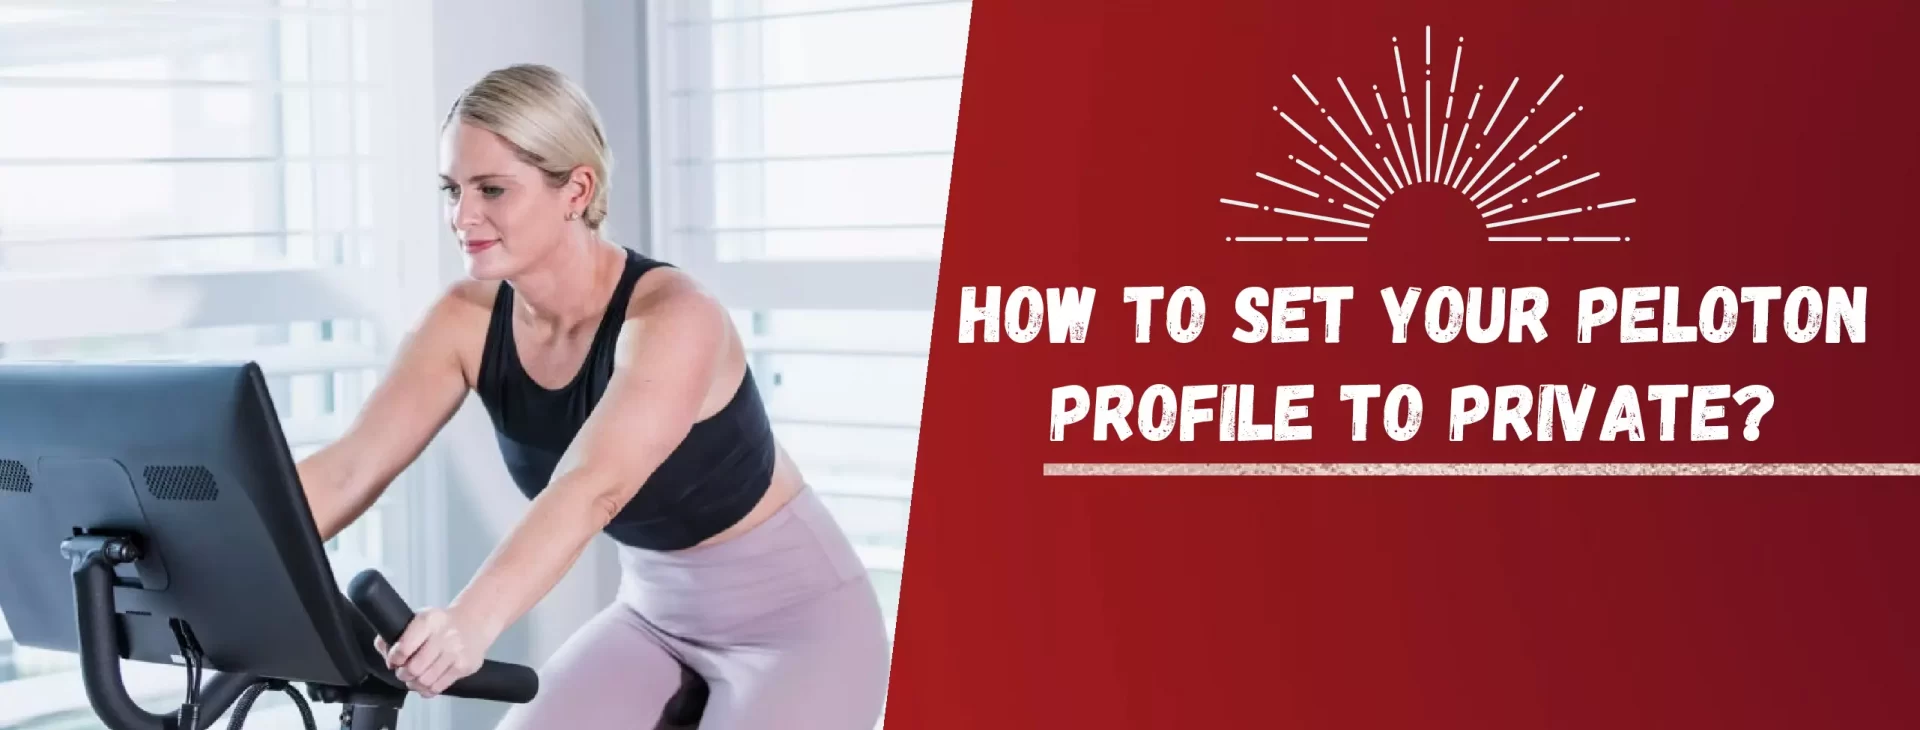 How To Set Your Peloton Profile To Private